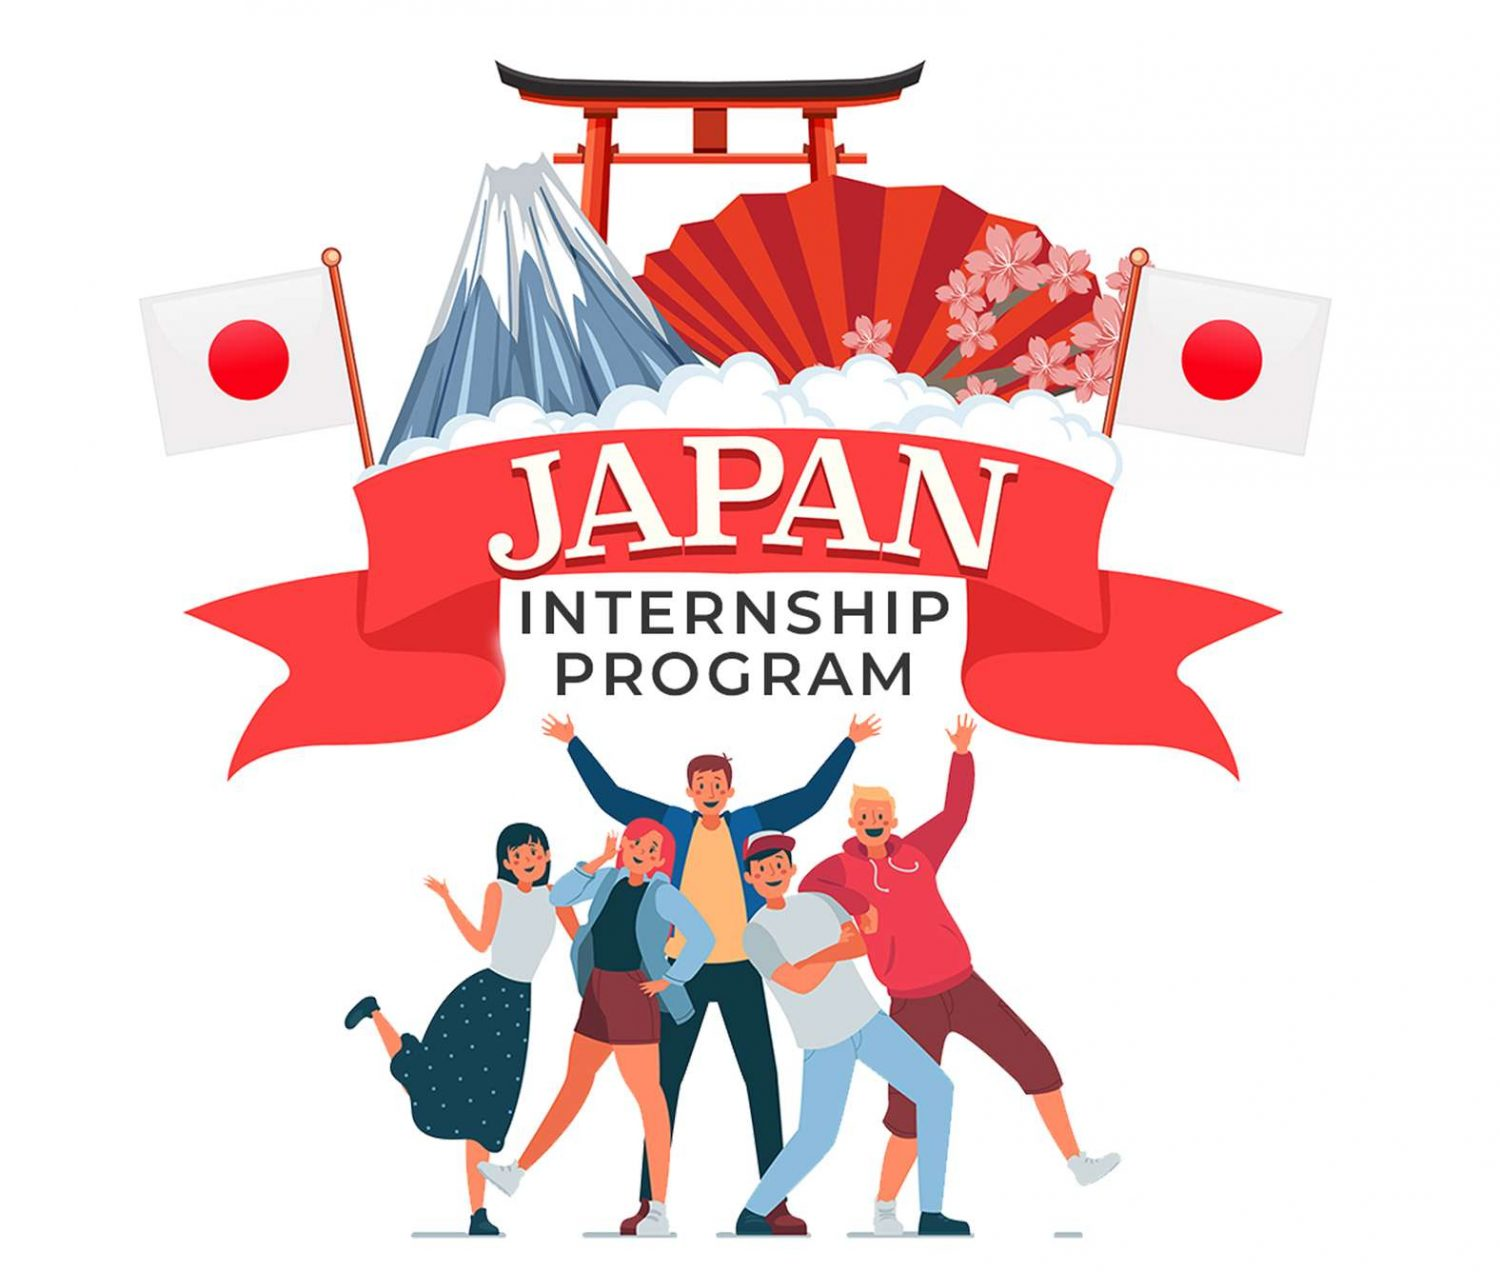 Two internships in Tokyo, Japan for students of Space Engineering